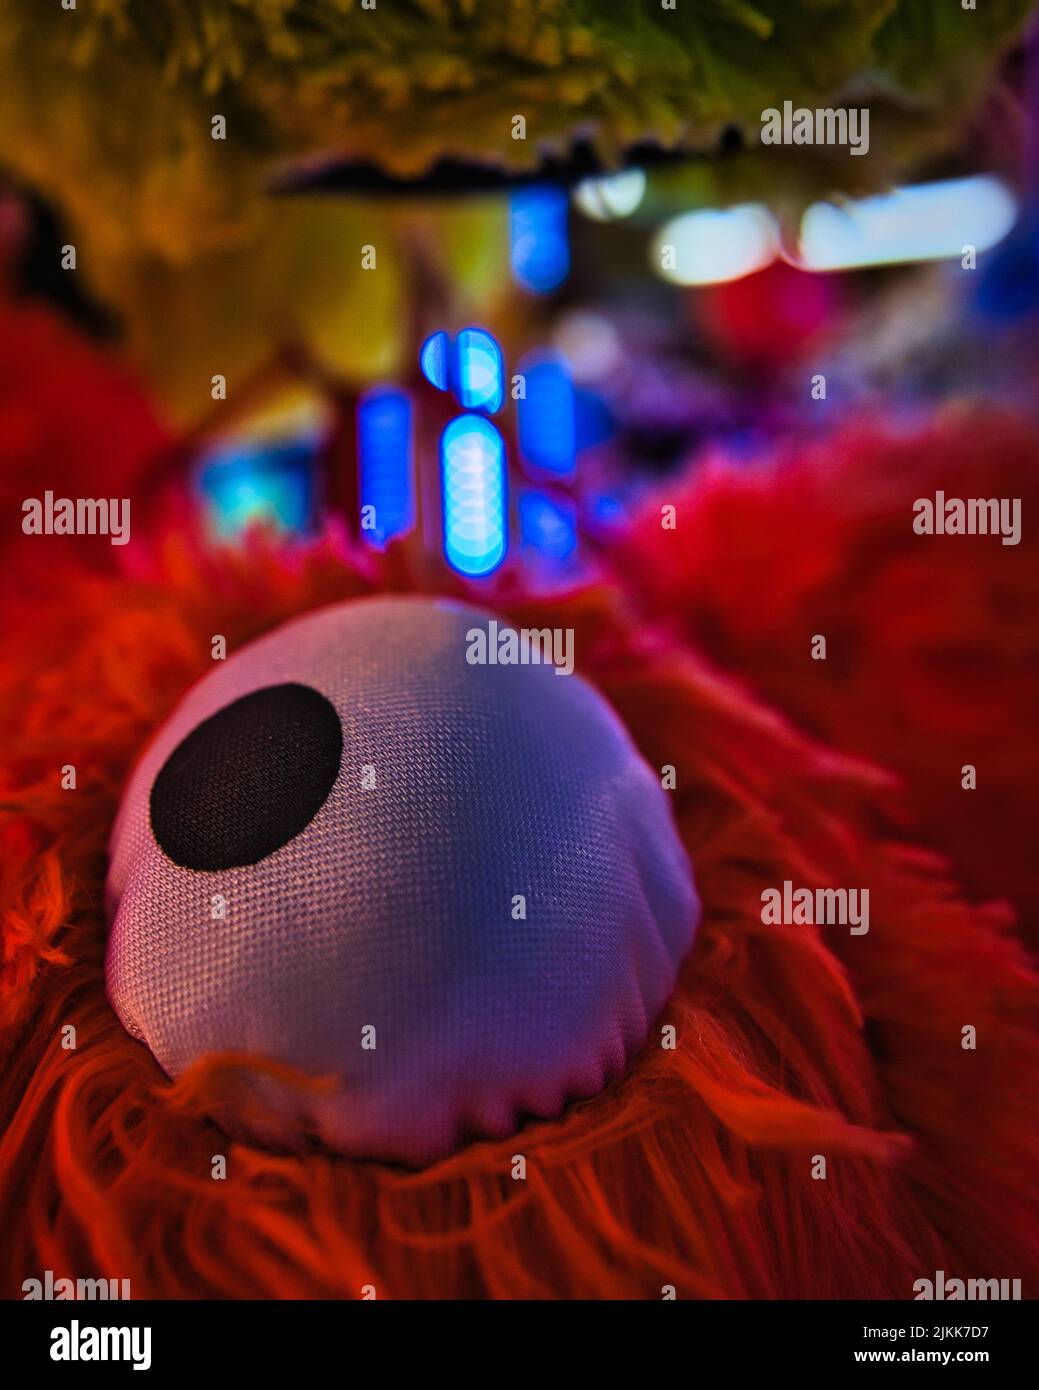 A closeup of an eye of a red, hairy stuffed toy Stock Photo